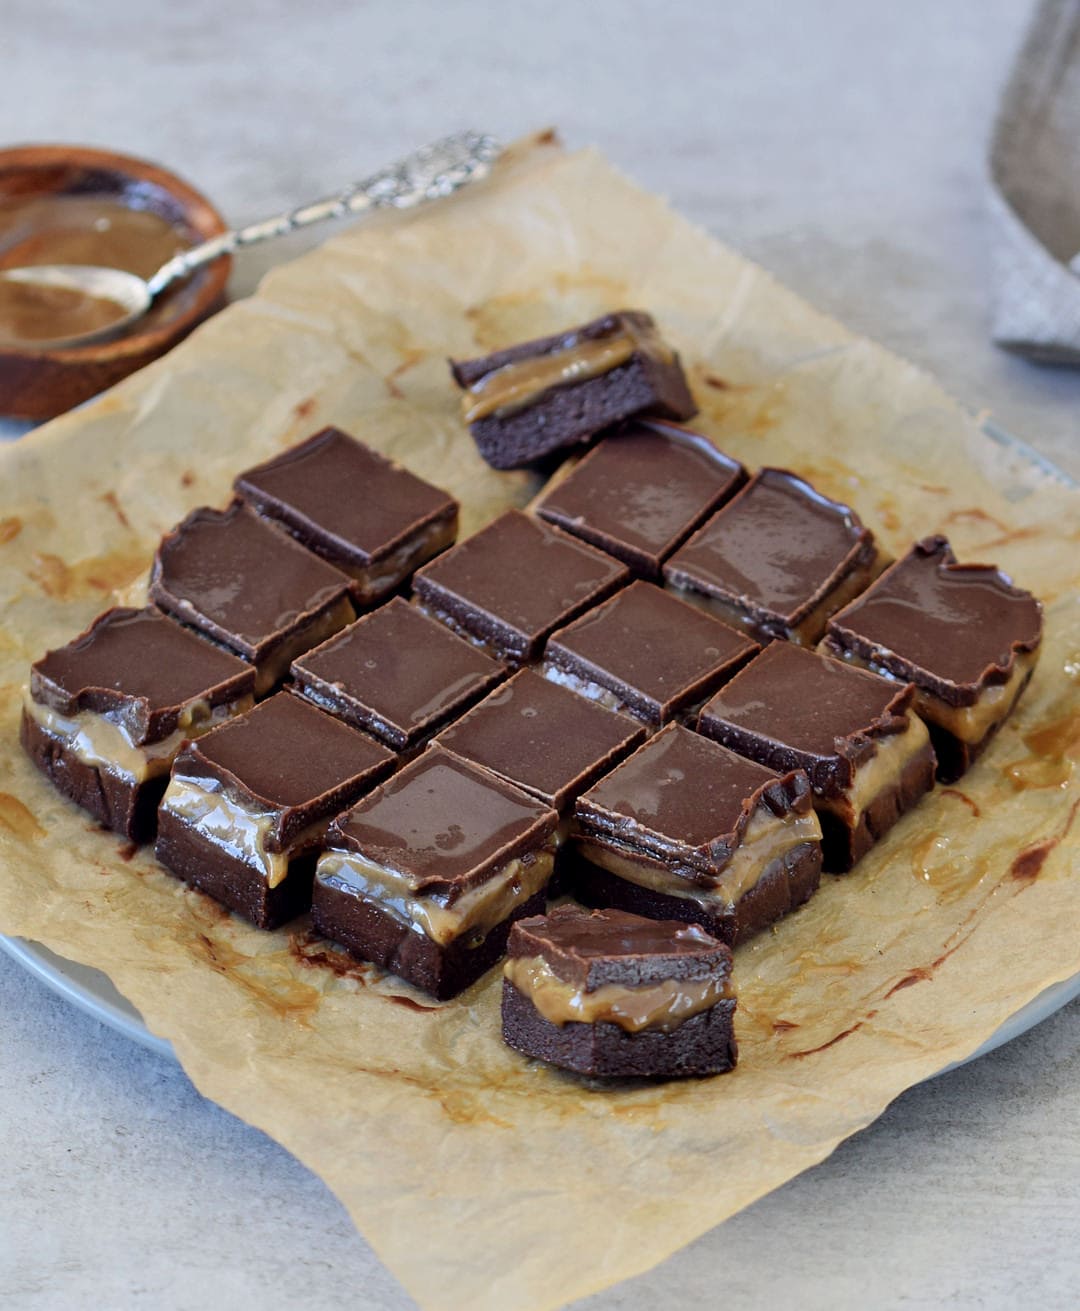 showing 16 brownie bites with caramel